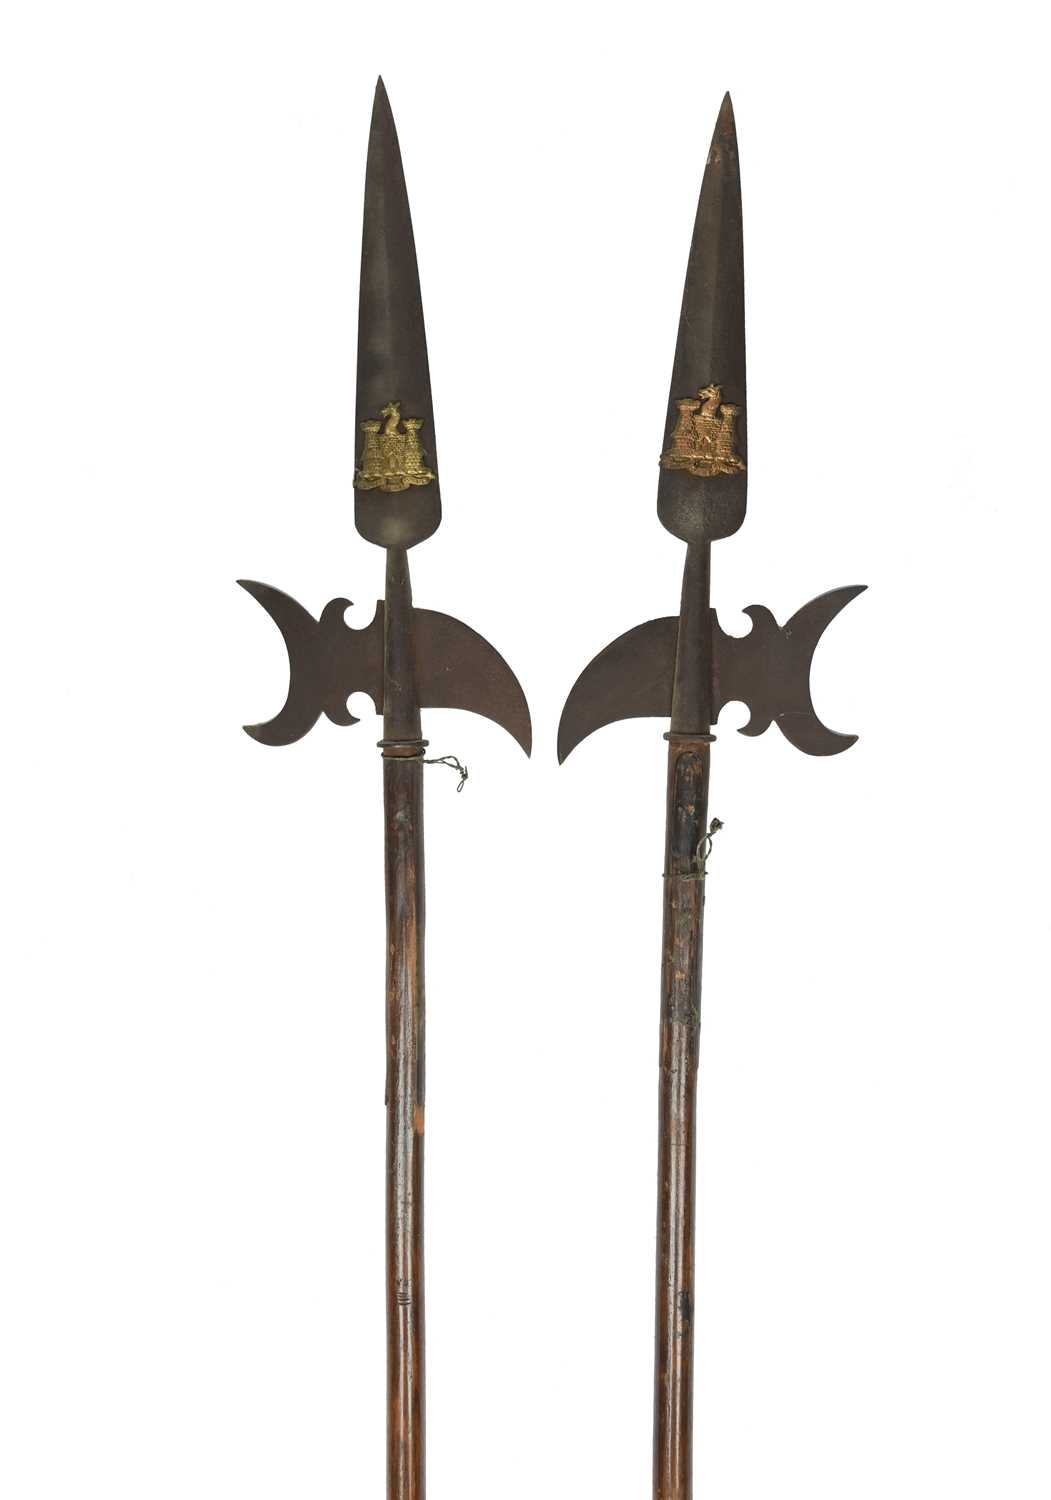 A pair of ornamental halberds, heads with crescent-shaped axe blades and curved rear spikes and